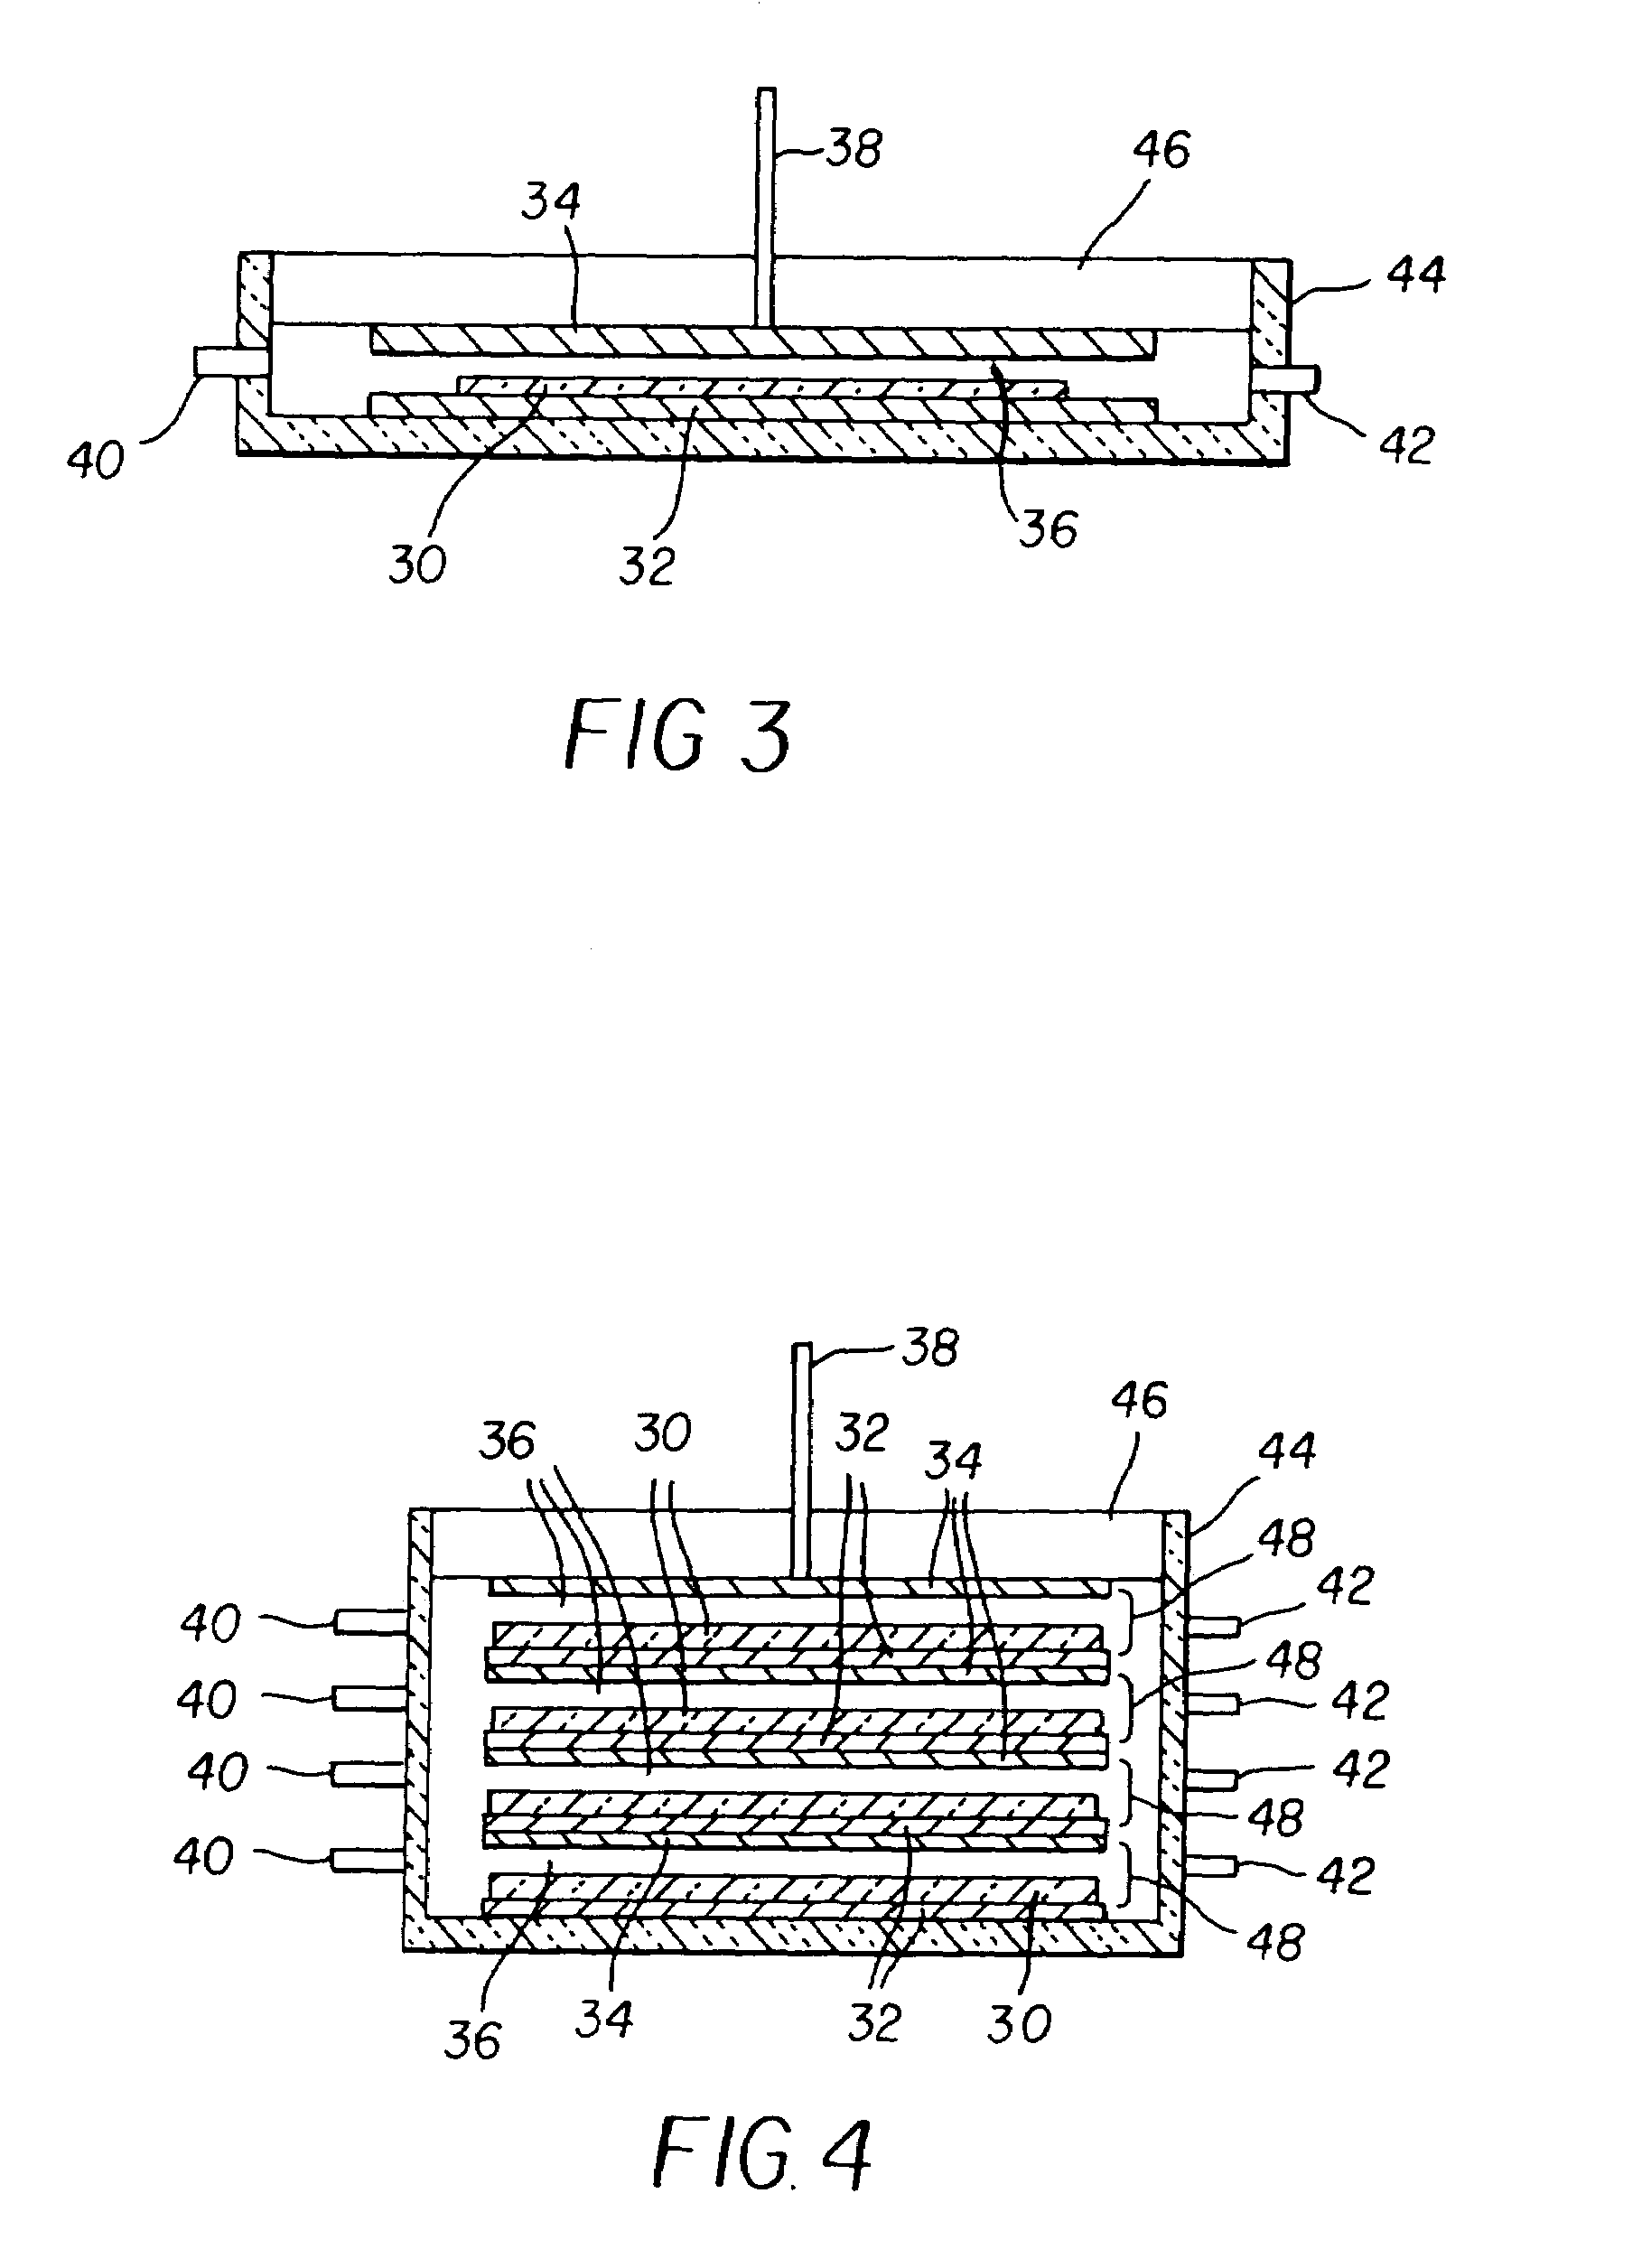 Providing fluorocarbon layers on conductive electrodes in making electronic devices such as OLED devices